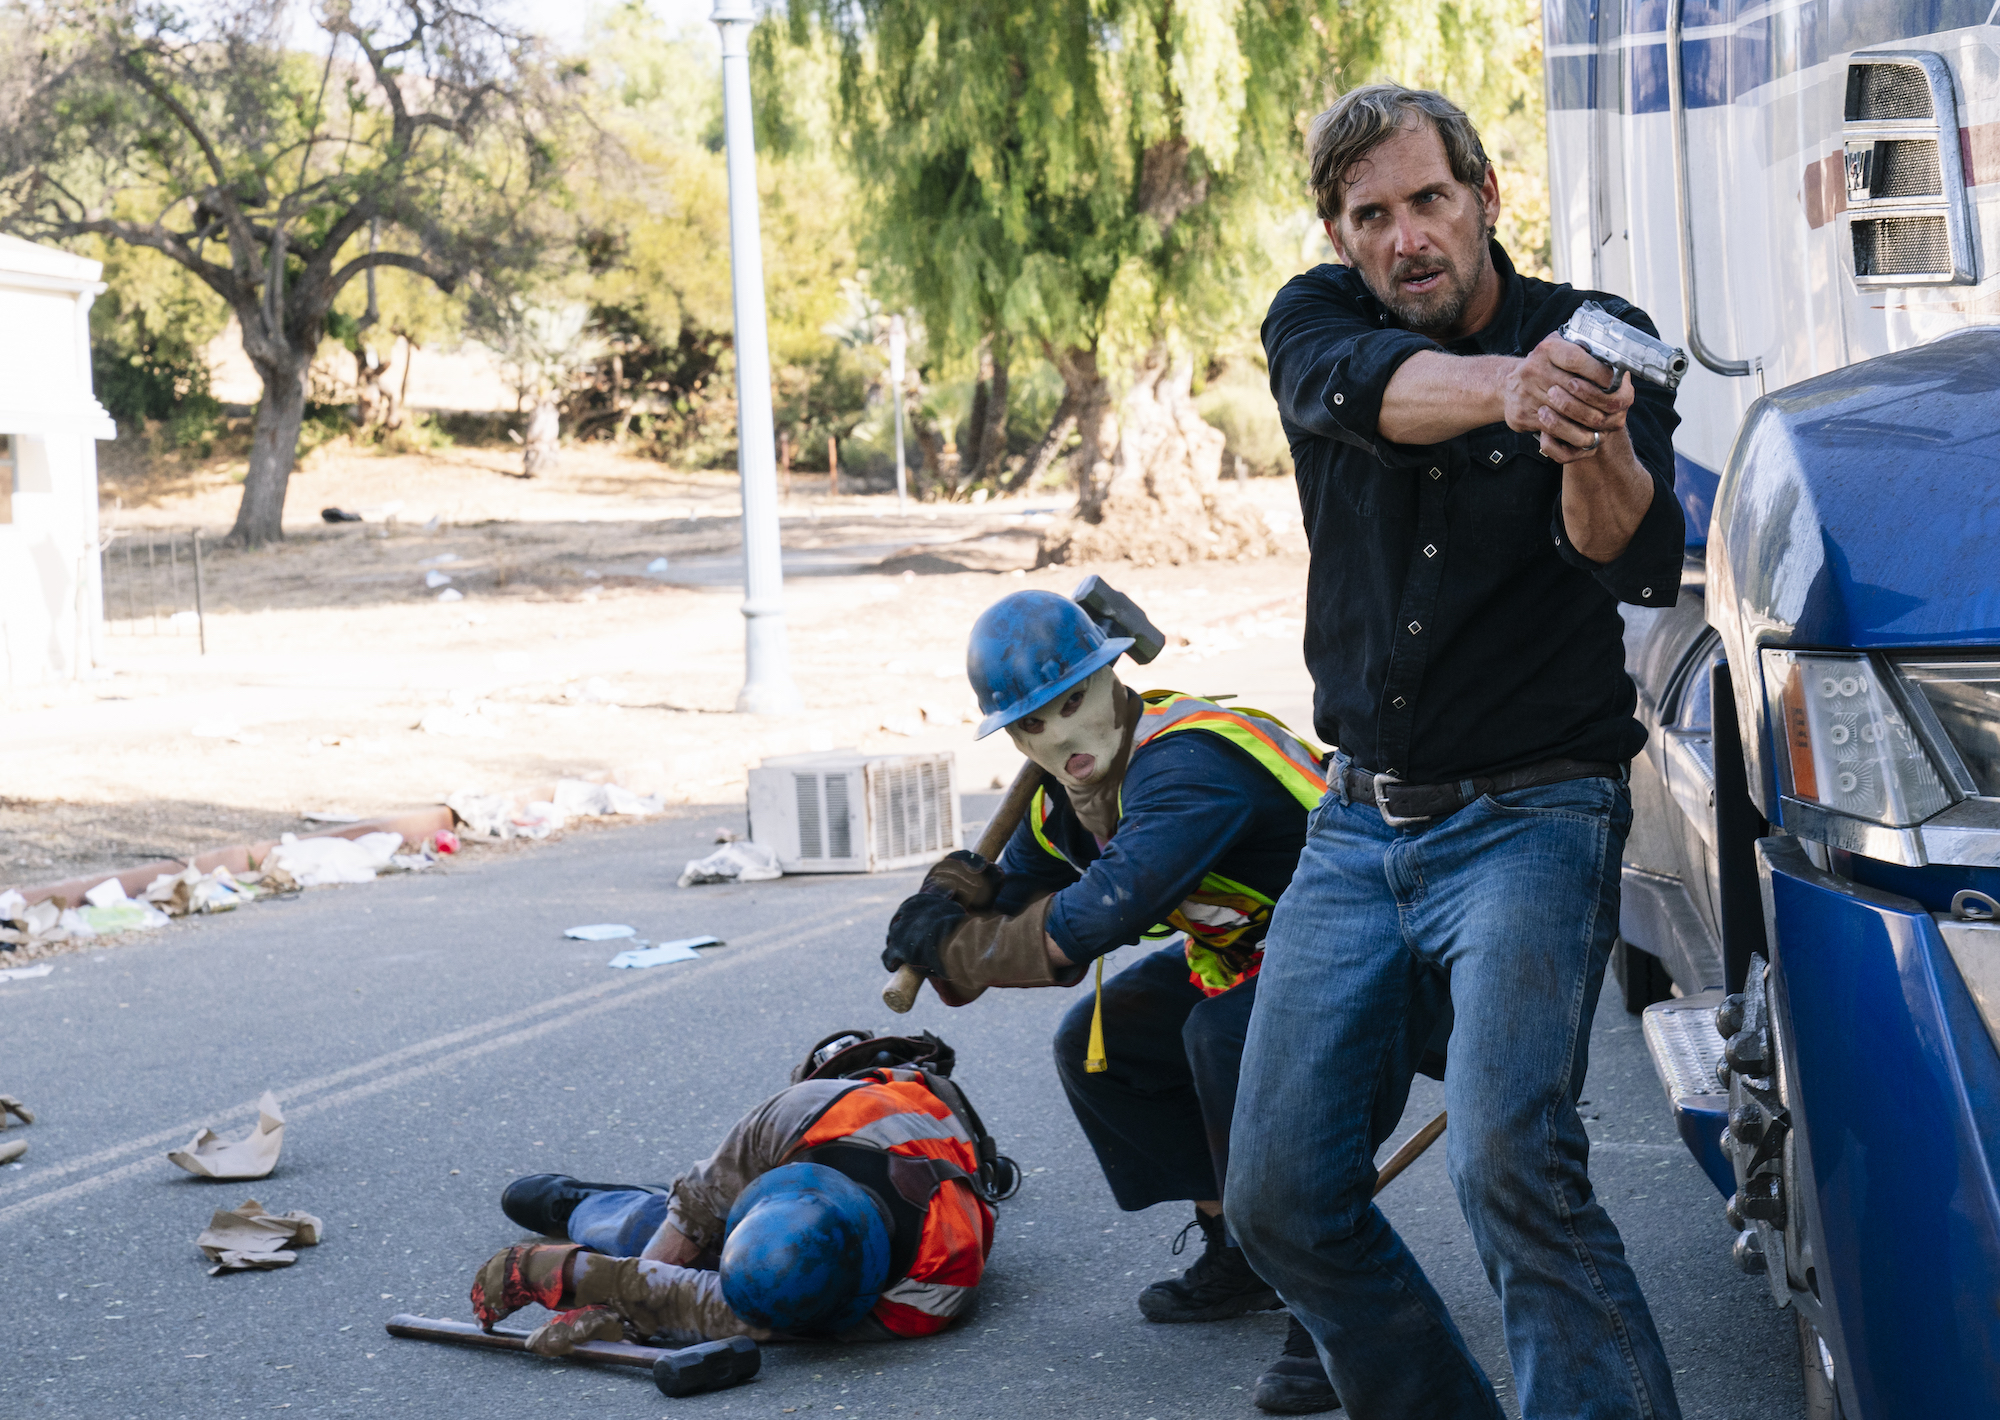 Josh Lucas points a gun in The Forever Purge